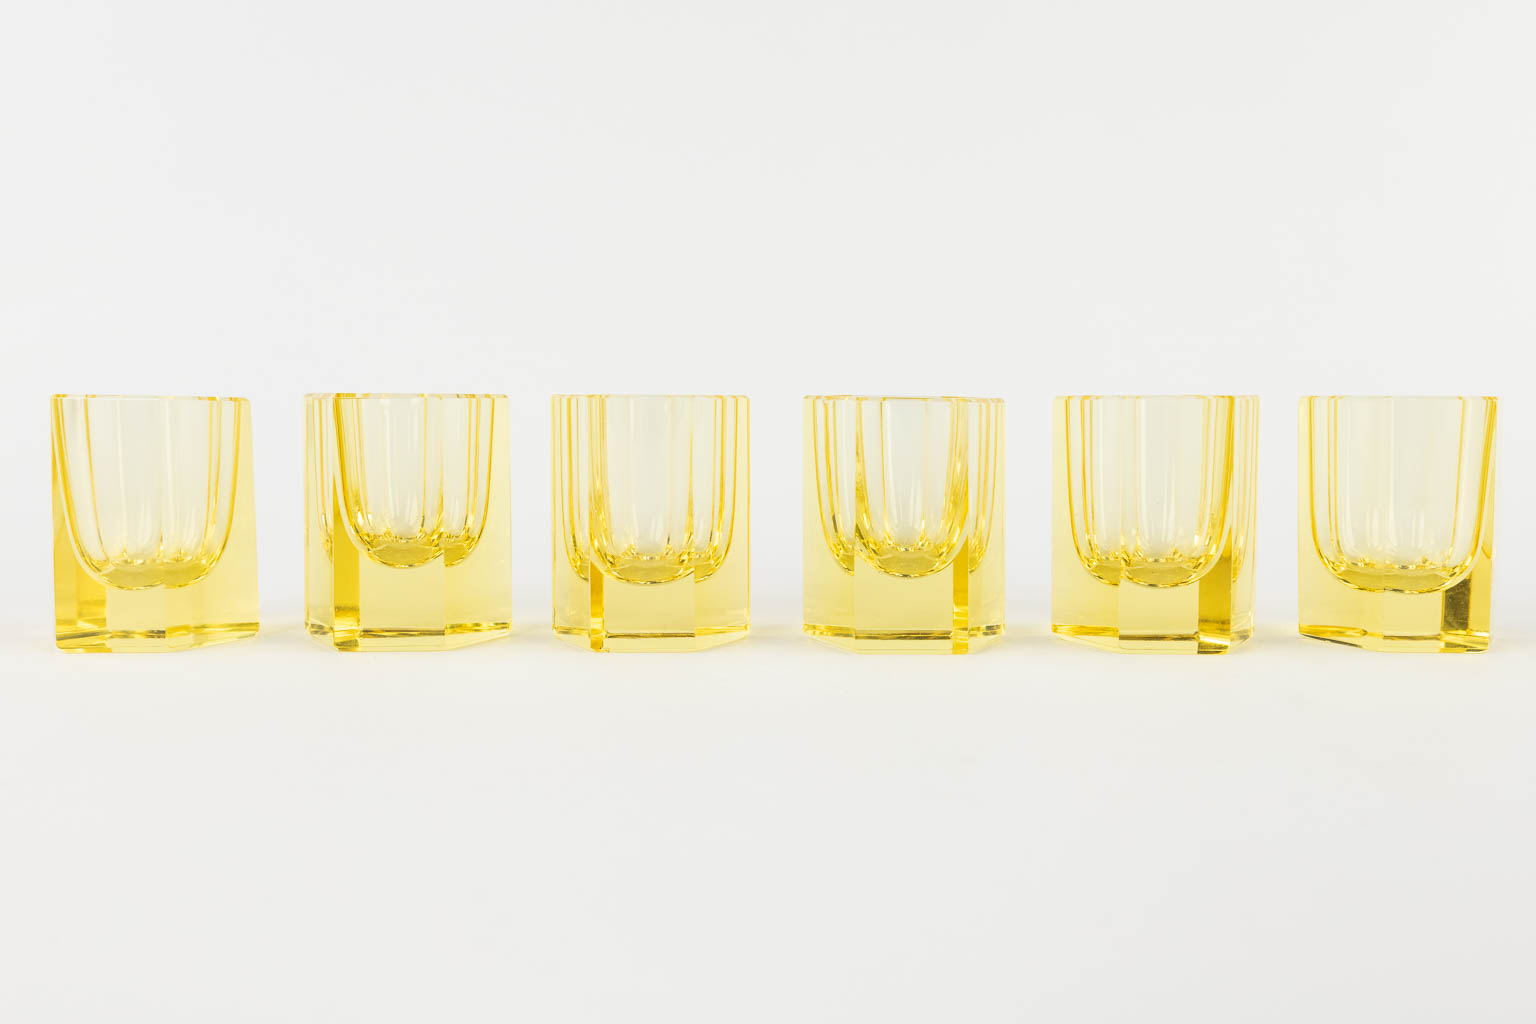 Moser Glass, Karlsbad, a carafe and 6 yellow glasses. 20th C. (D:8 x W:8 x H:25 cm)